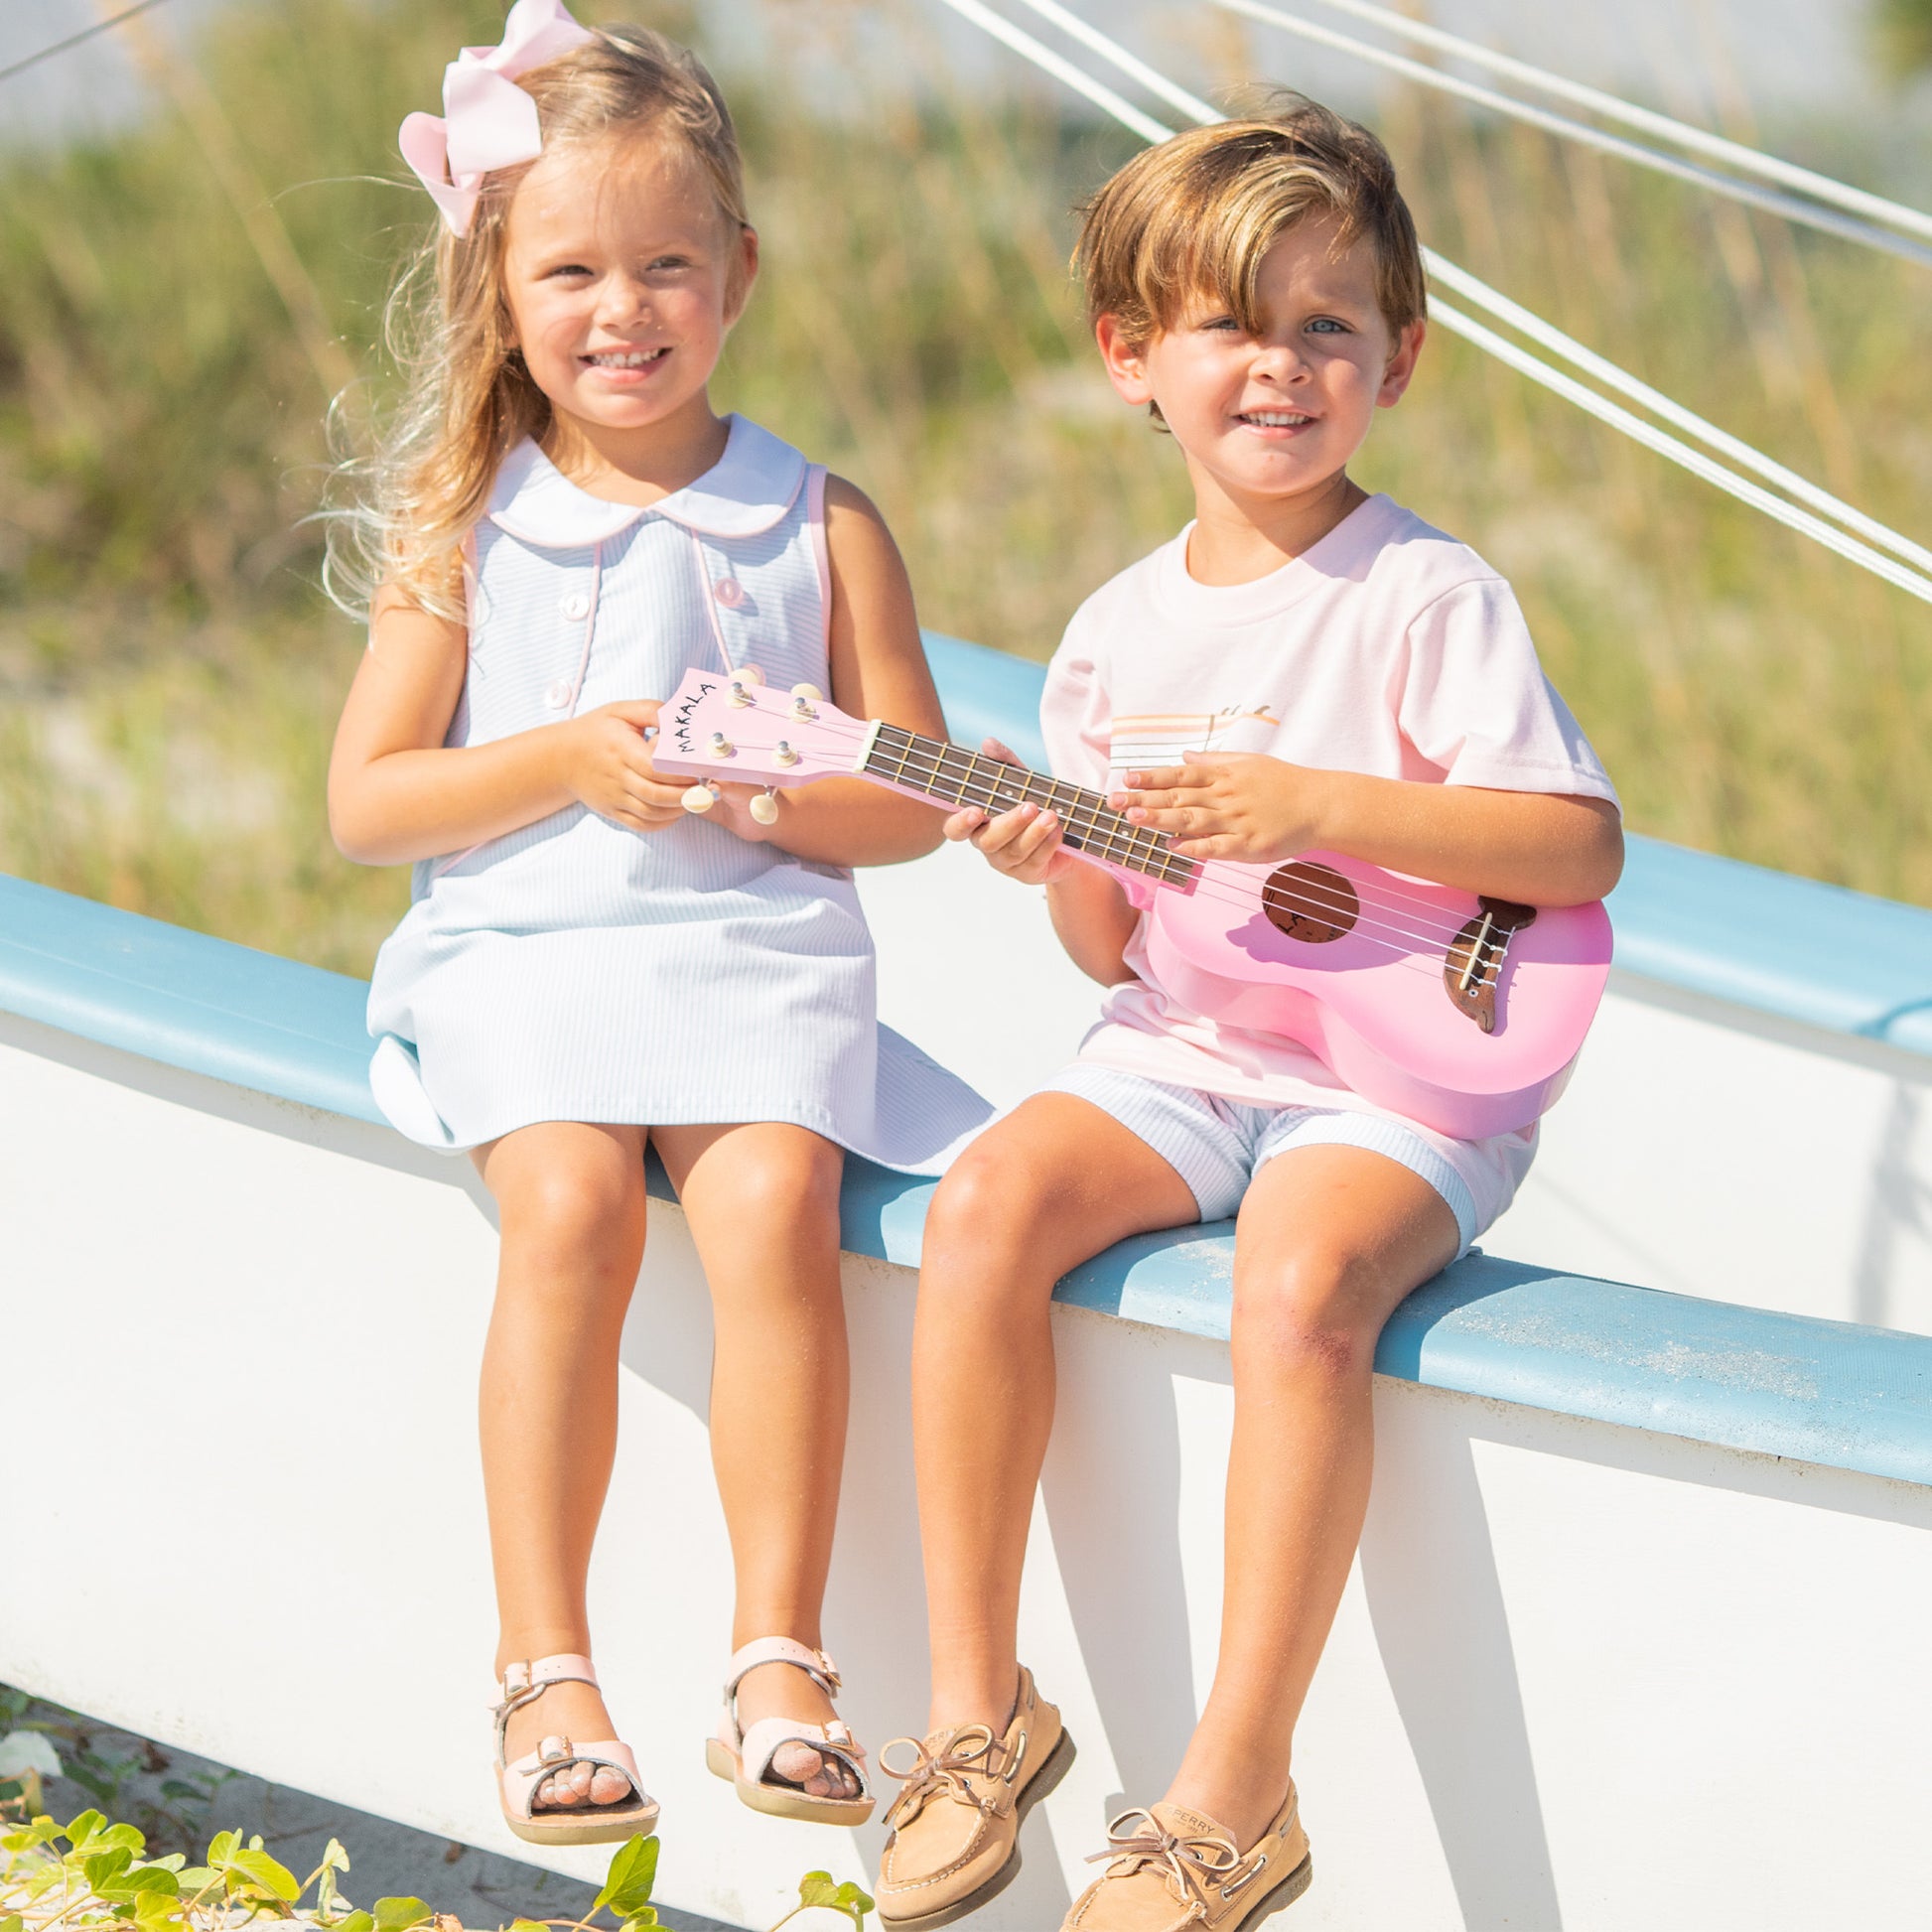 little boy holding a pink play guitar sitting on the boat with a little girl